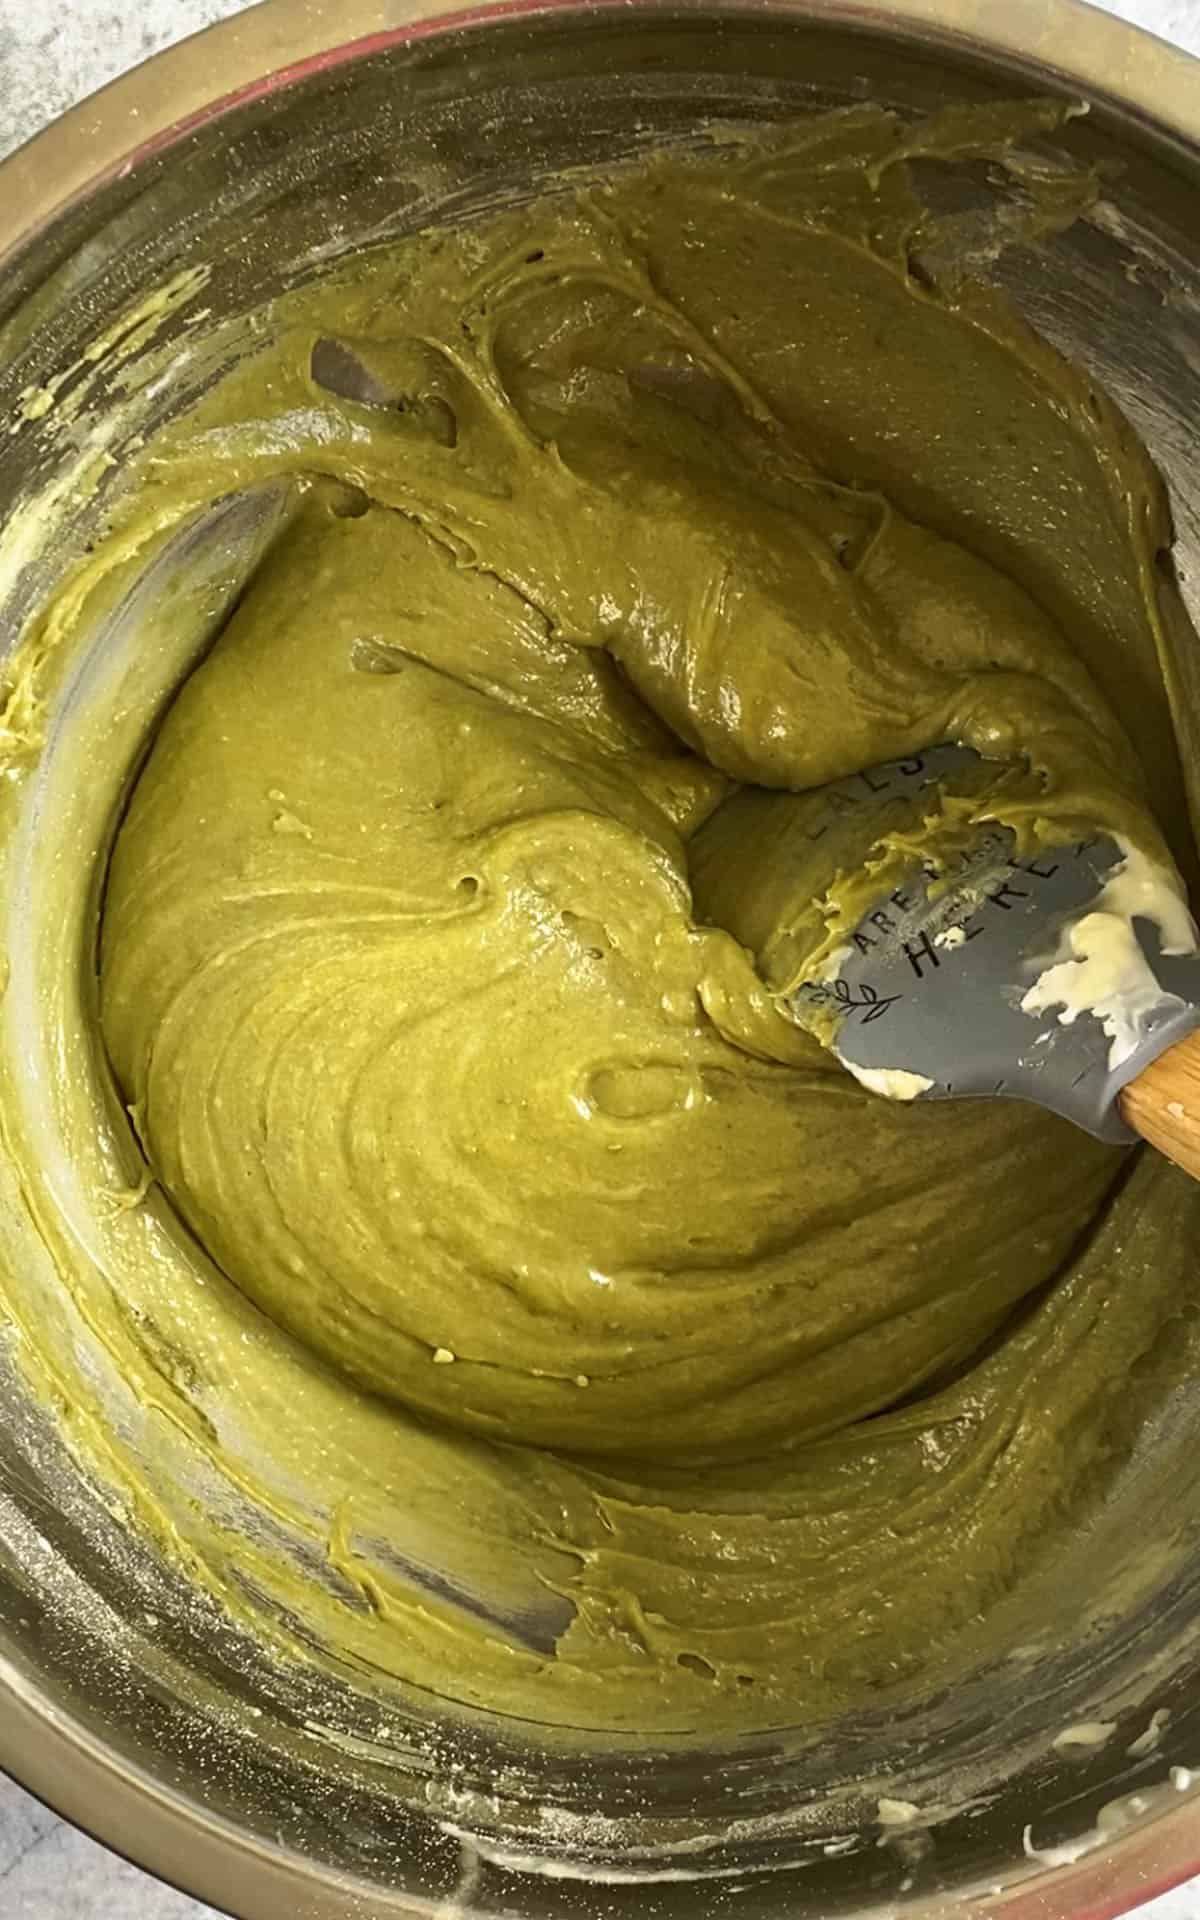 Matcha and other dry ingredients added to the bowl of wet ingredients. 